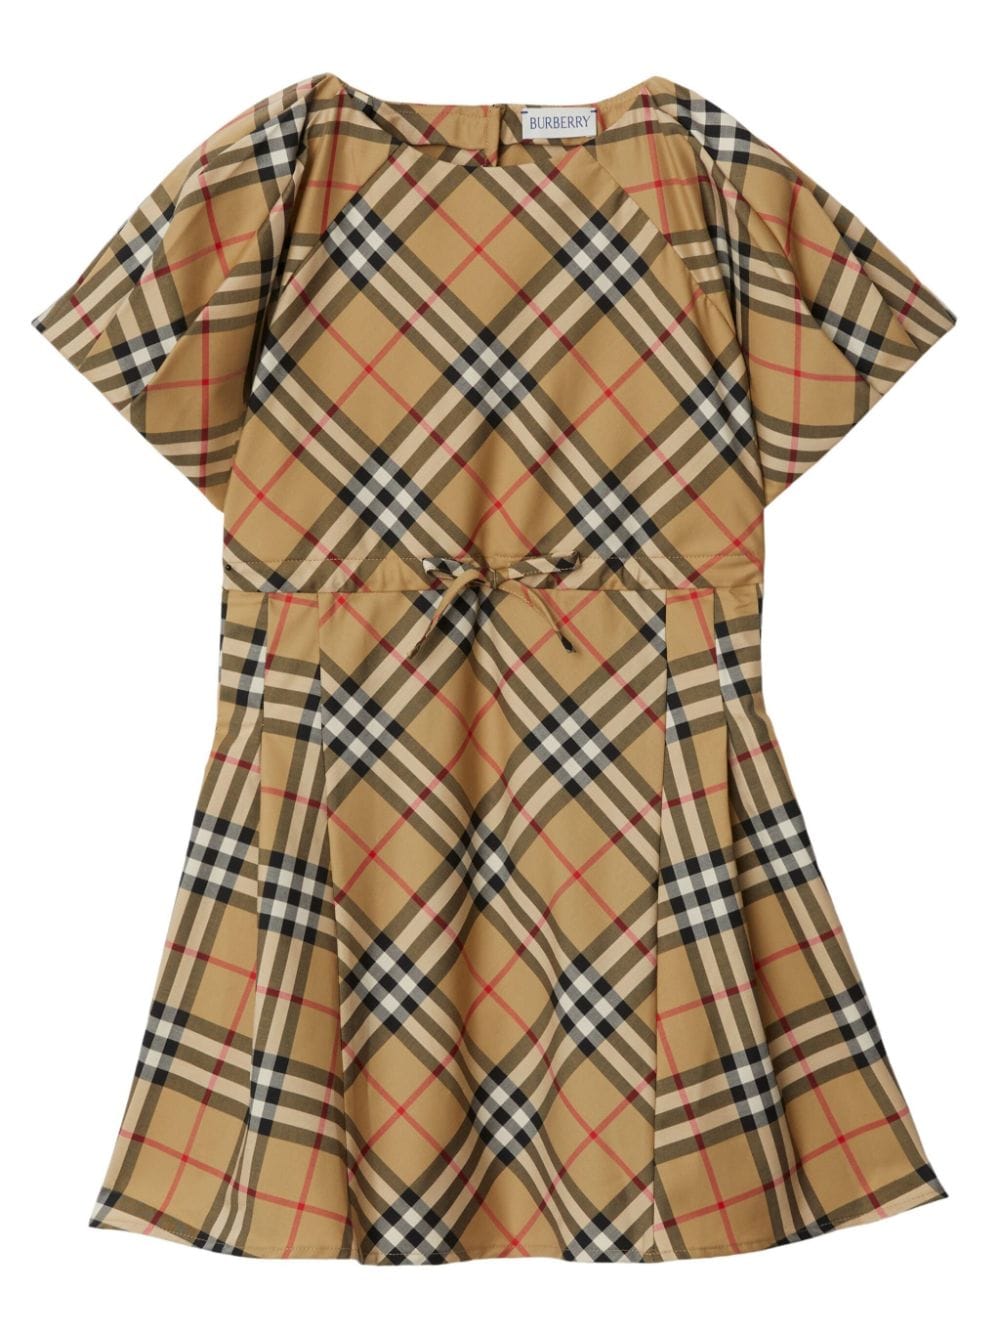 Checked pleated minidress<BR/><BR/><BR/>